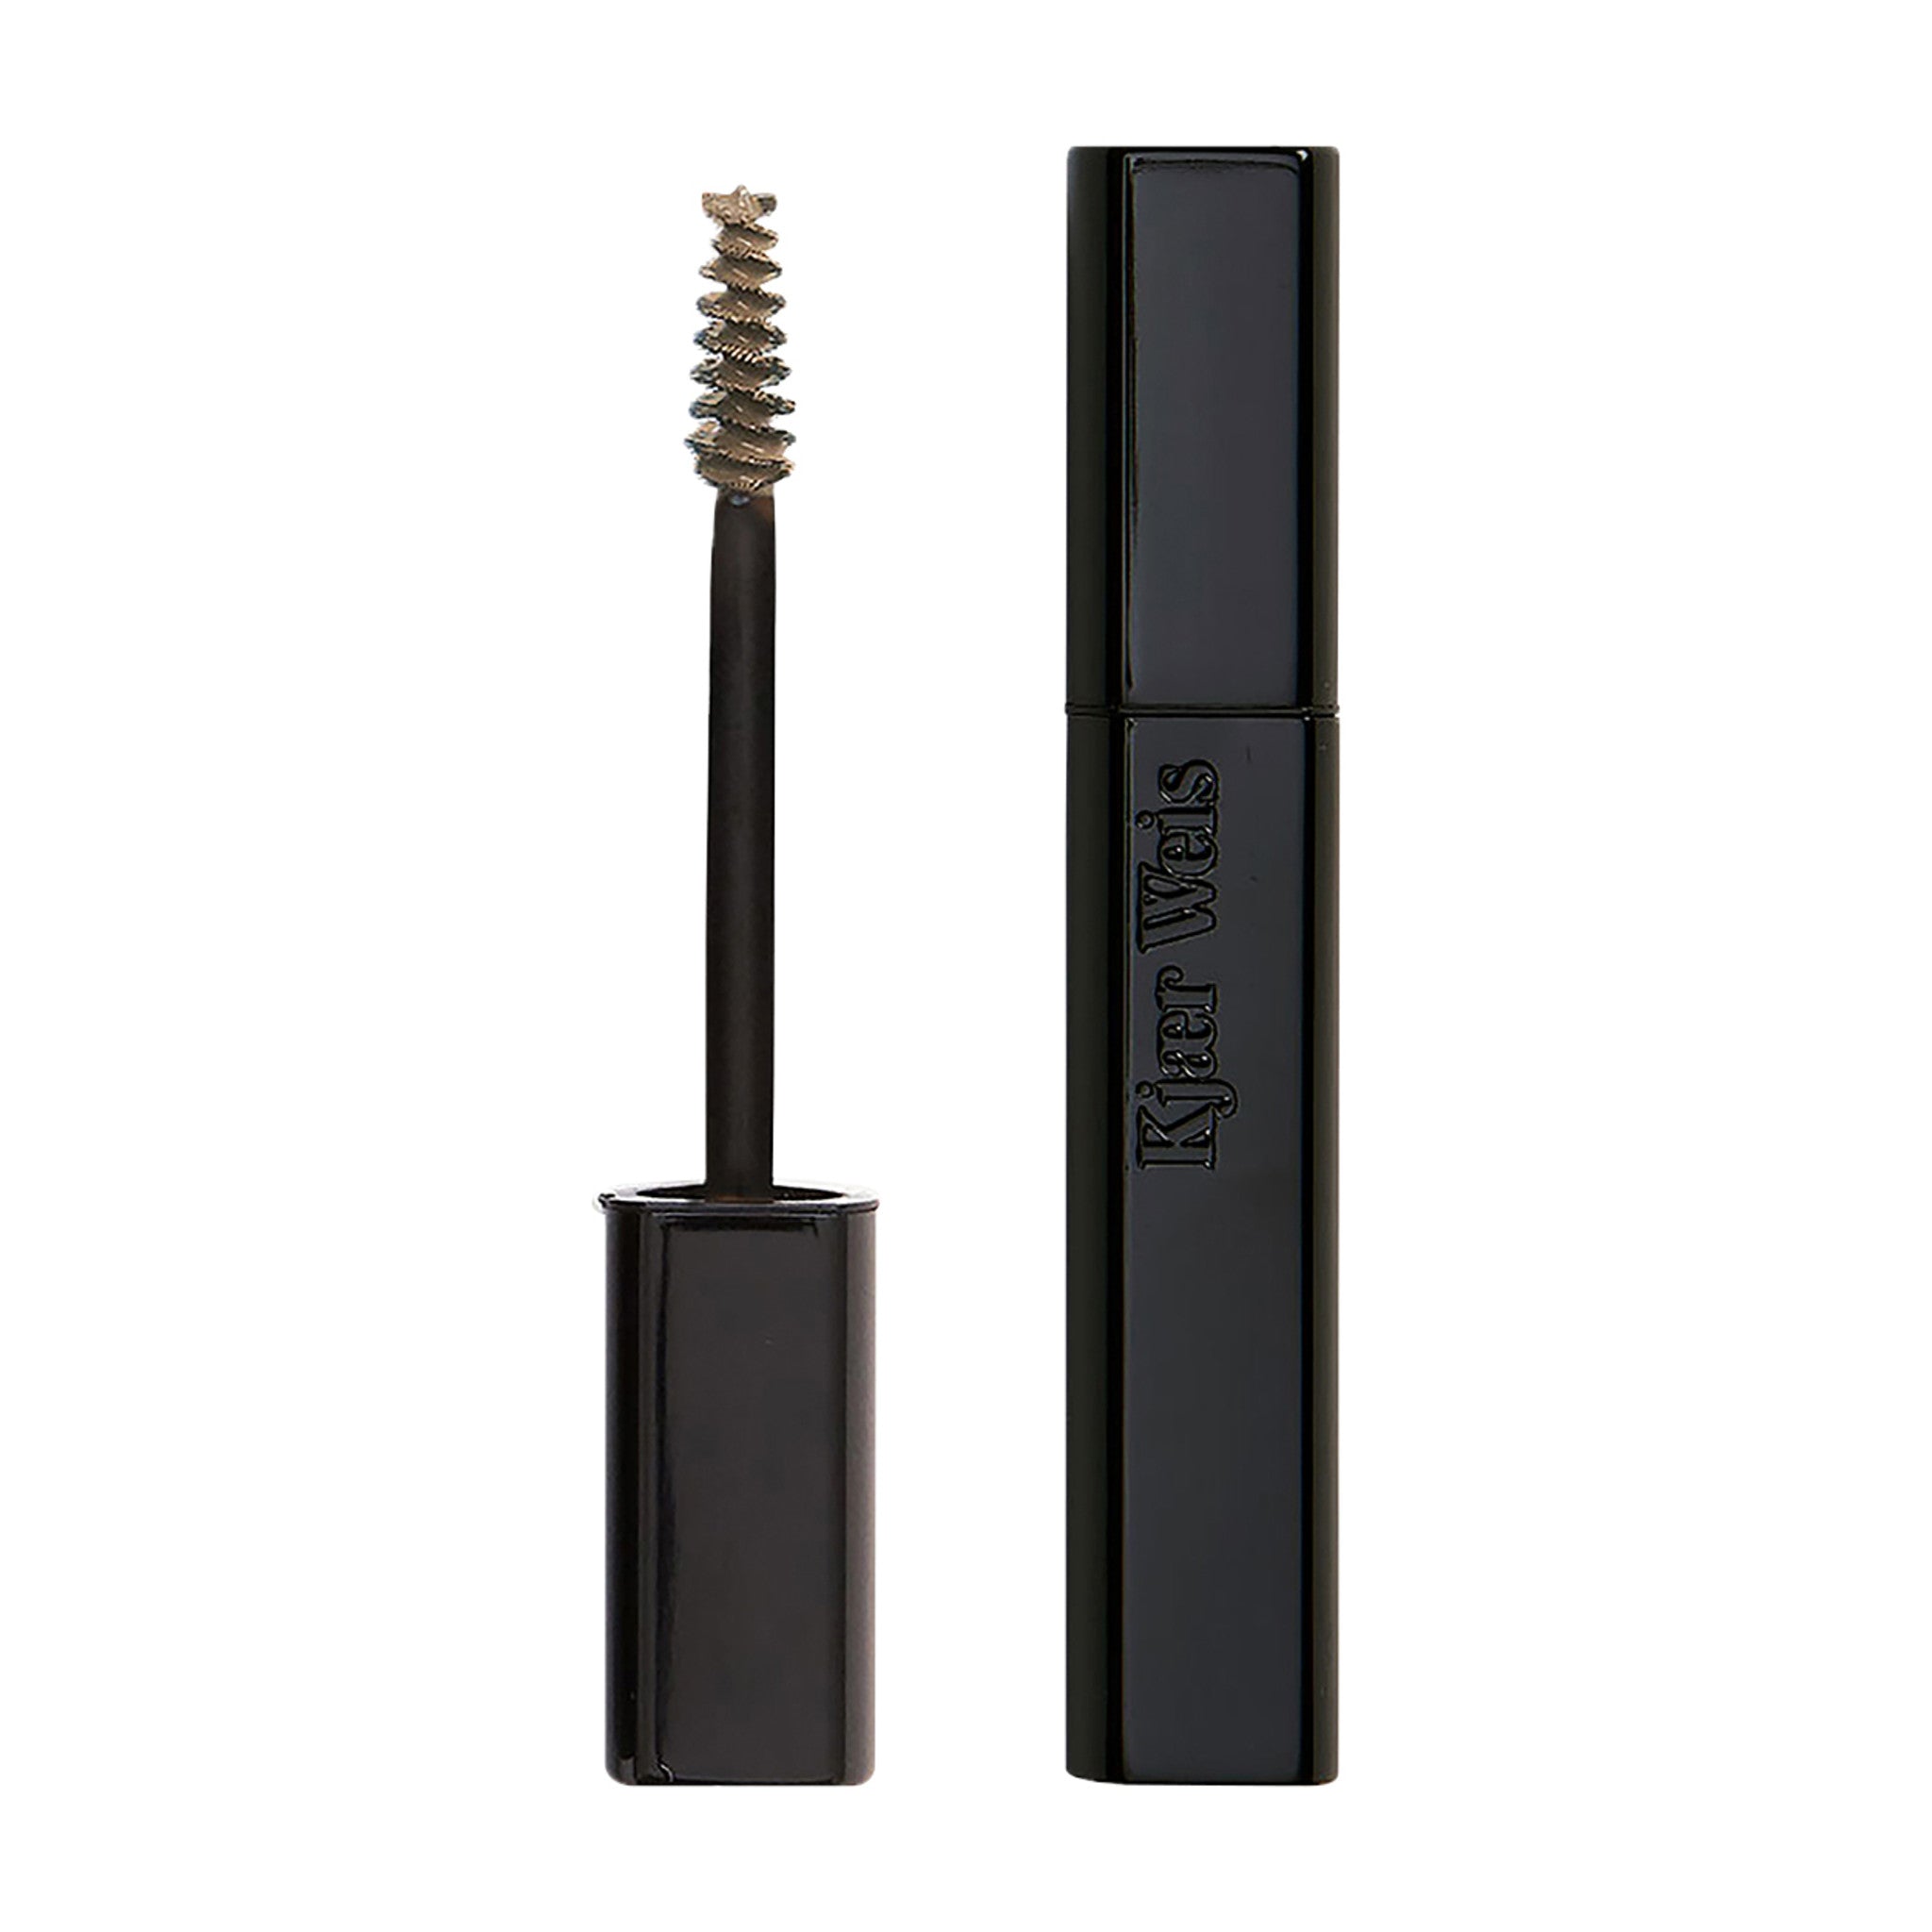 Kjaer Weis FeatherTouch Brow Gel Color/Shade variant: Blonde main image. This product is in the color brown